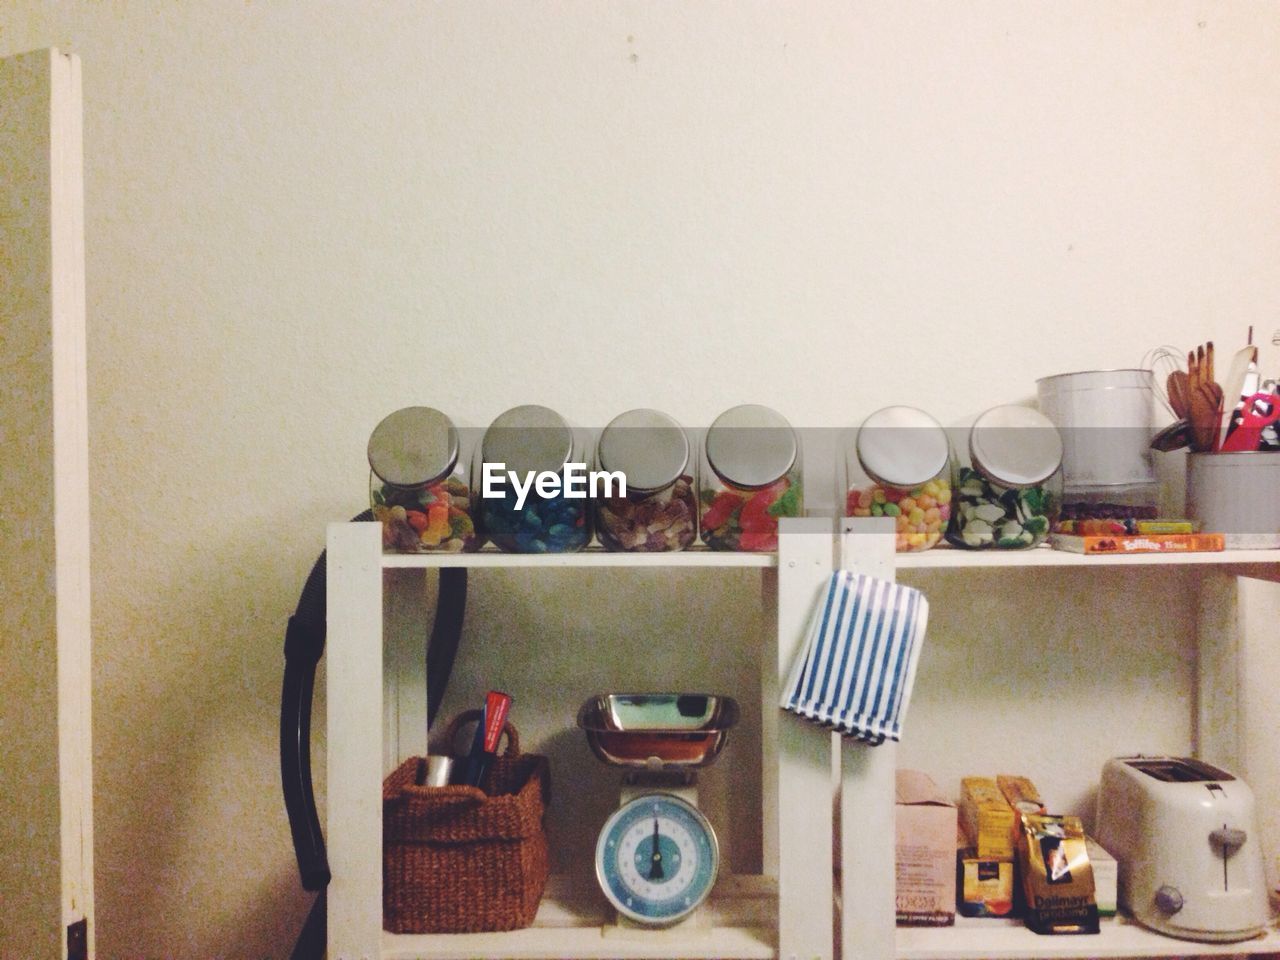 Glass jars with group of objects on shelf against the wall